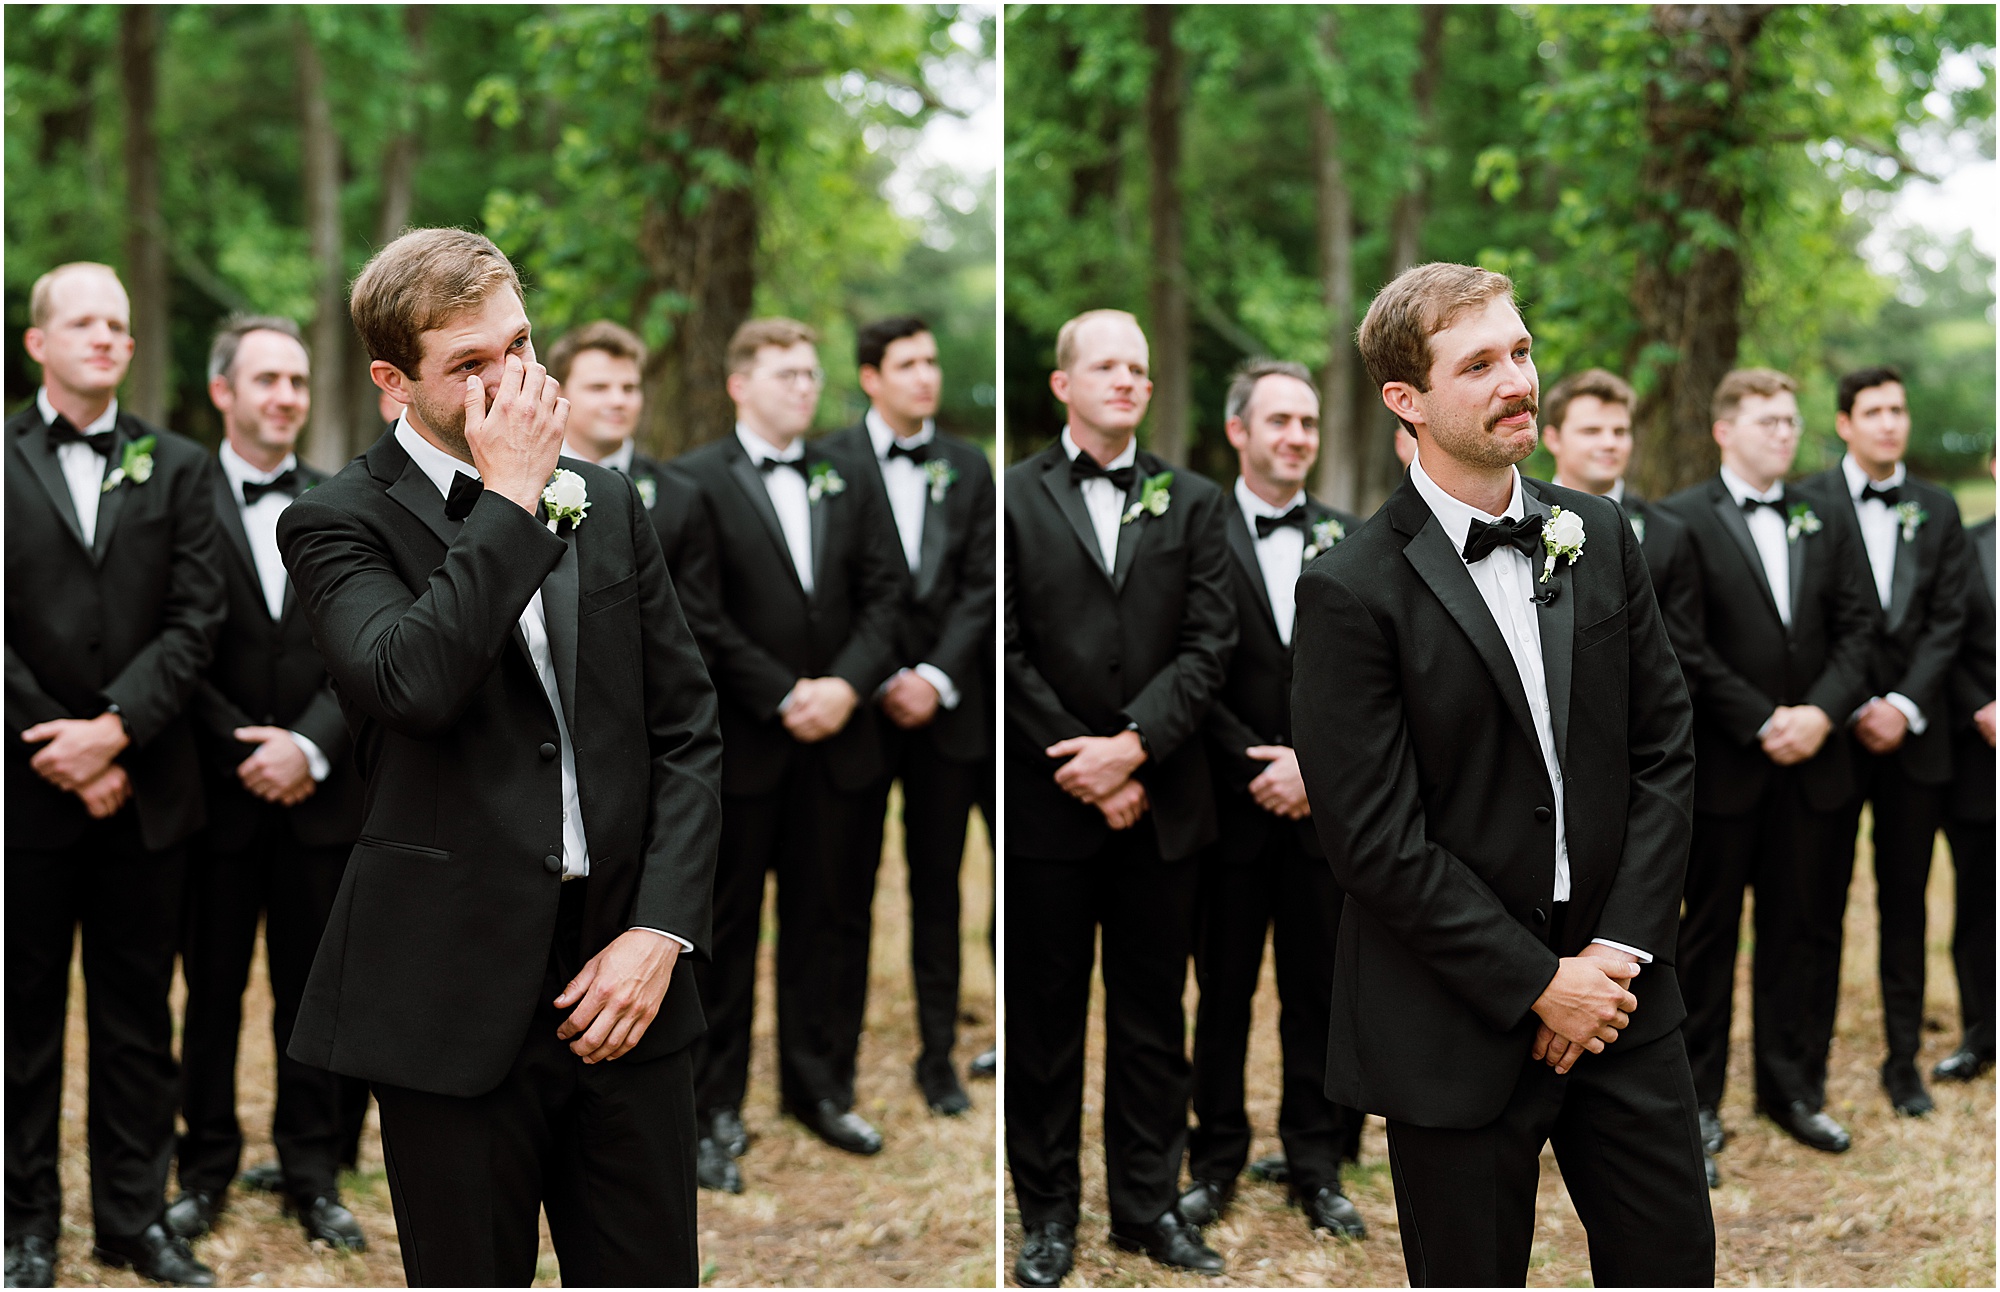 Groom seeing bride for the first time as she walks down the aisle.